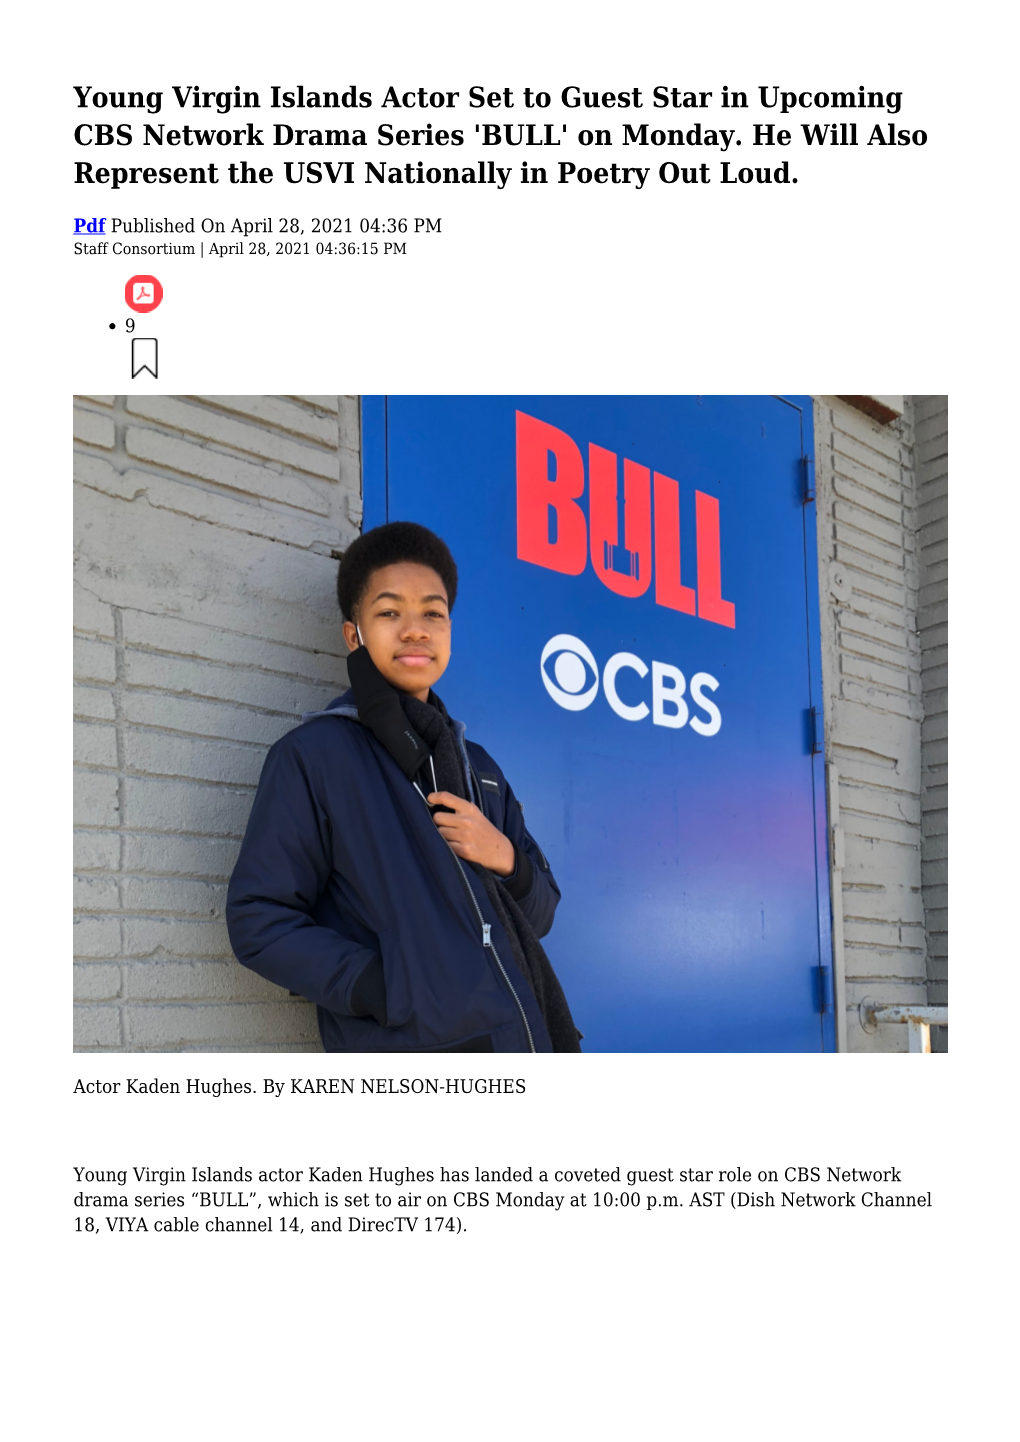 Young Virgin Islands Actor Set to Guest Star in Upcoming CBS Network Drama Series 'BULL' on Monday